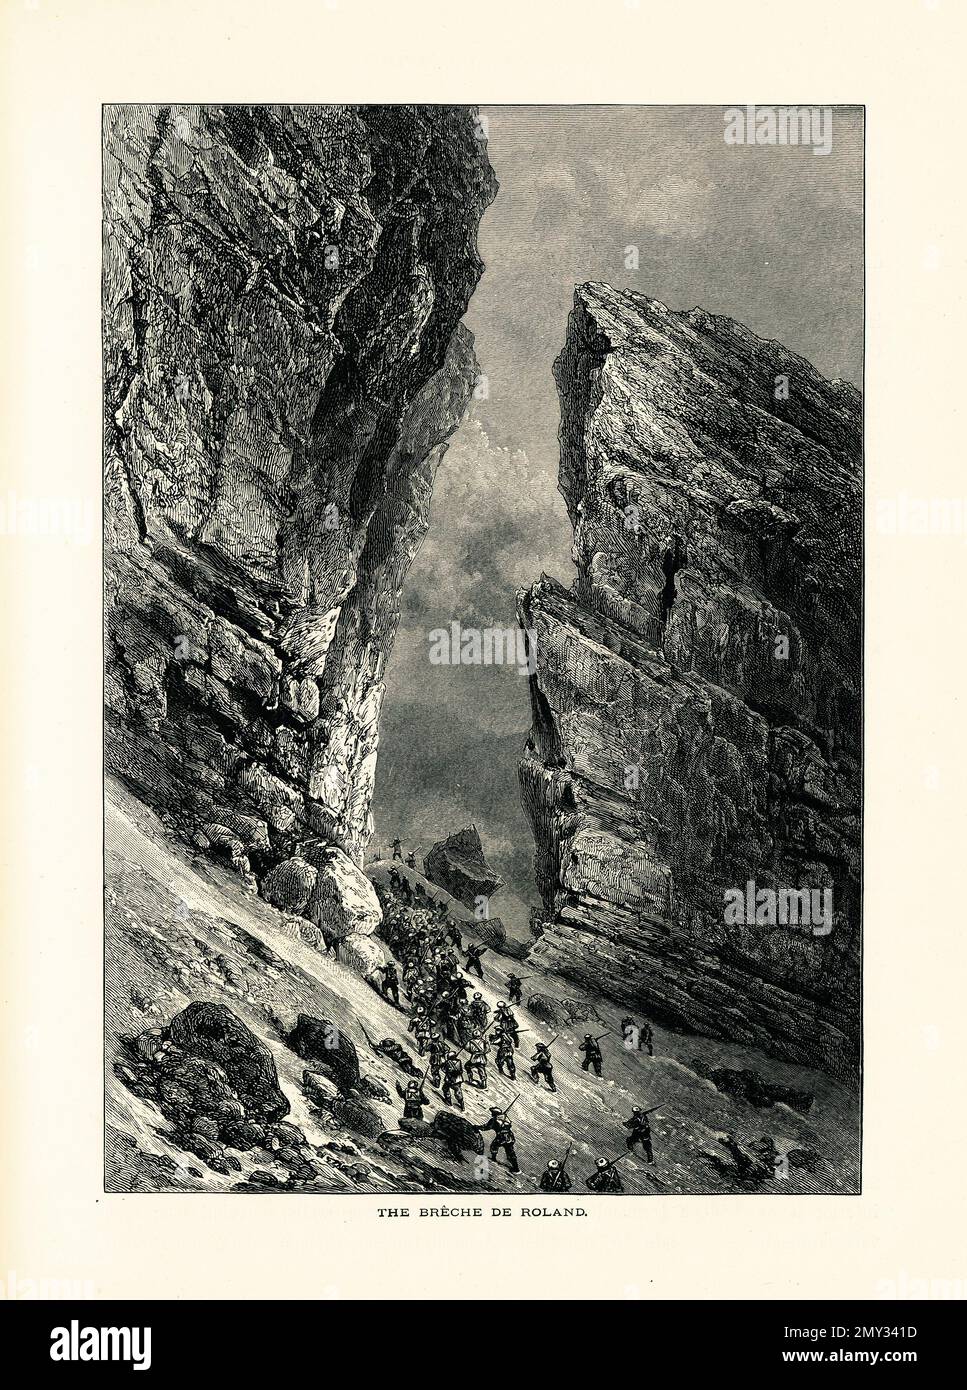 Antique illustration of La Breche de Roland, a natural gap in the Pyrenees, at the border between France and Spain. Engraving published in Picturesque Stock Photo